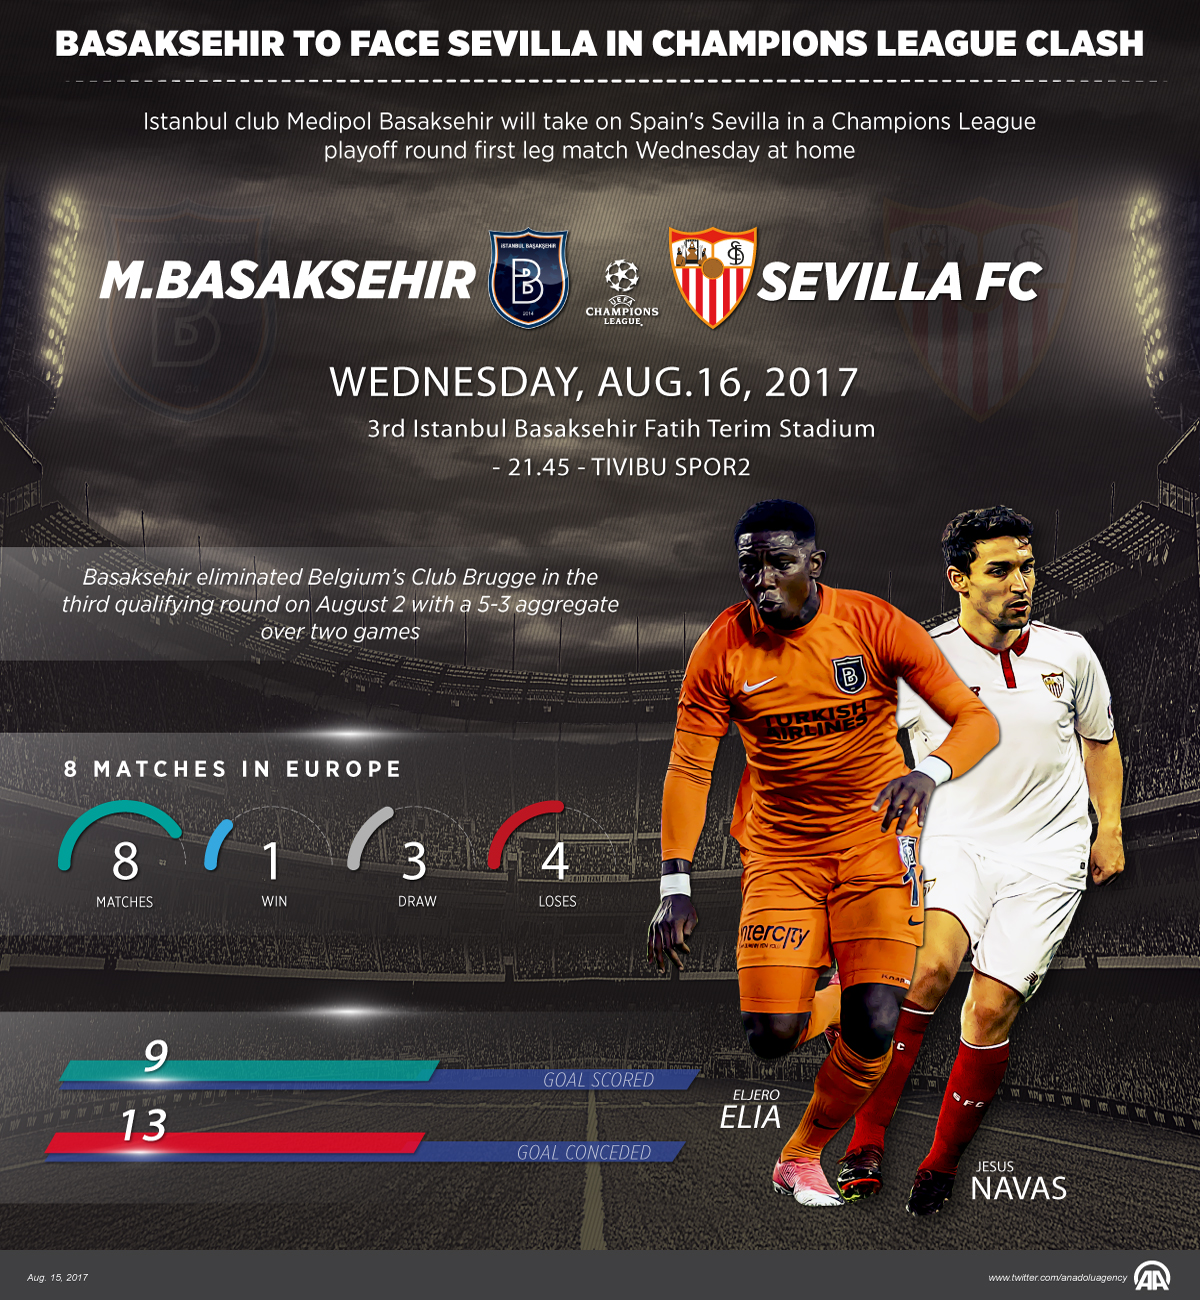 Basaksehir to face Sevilla in Champions League clash